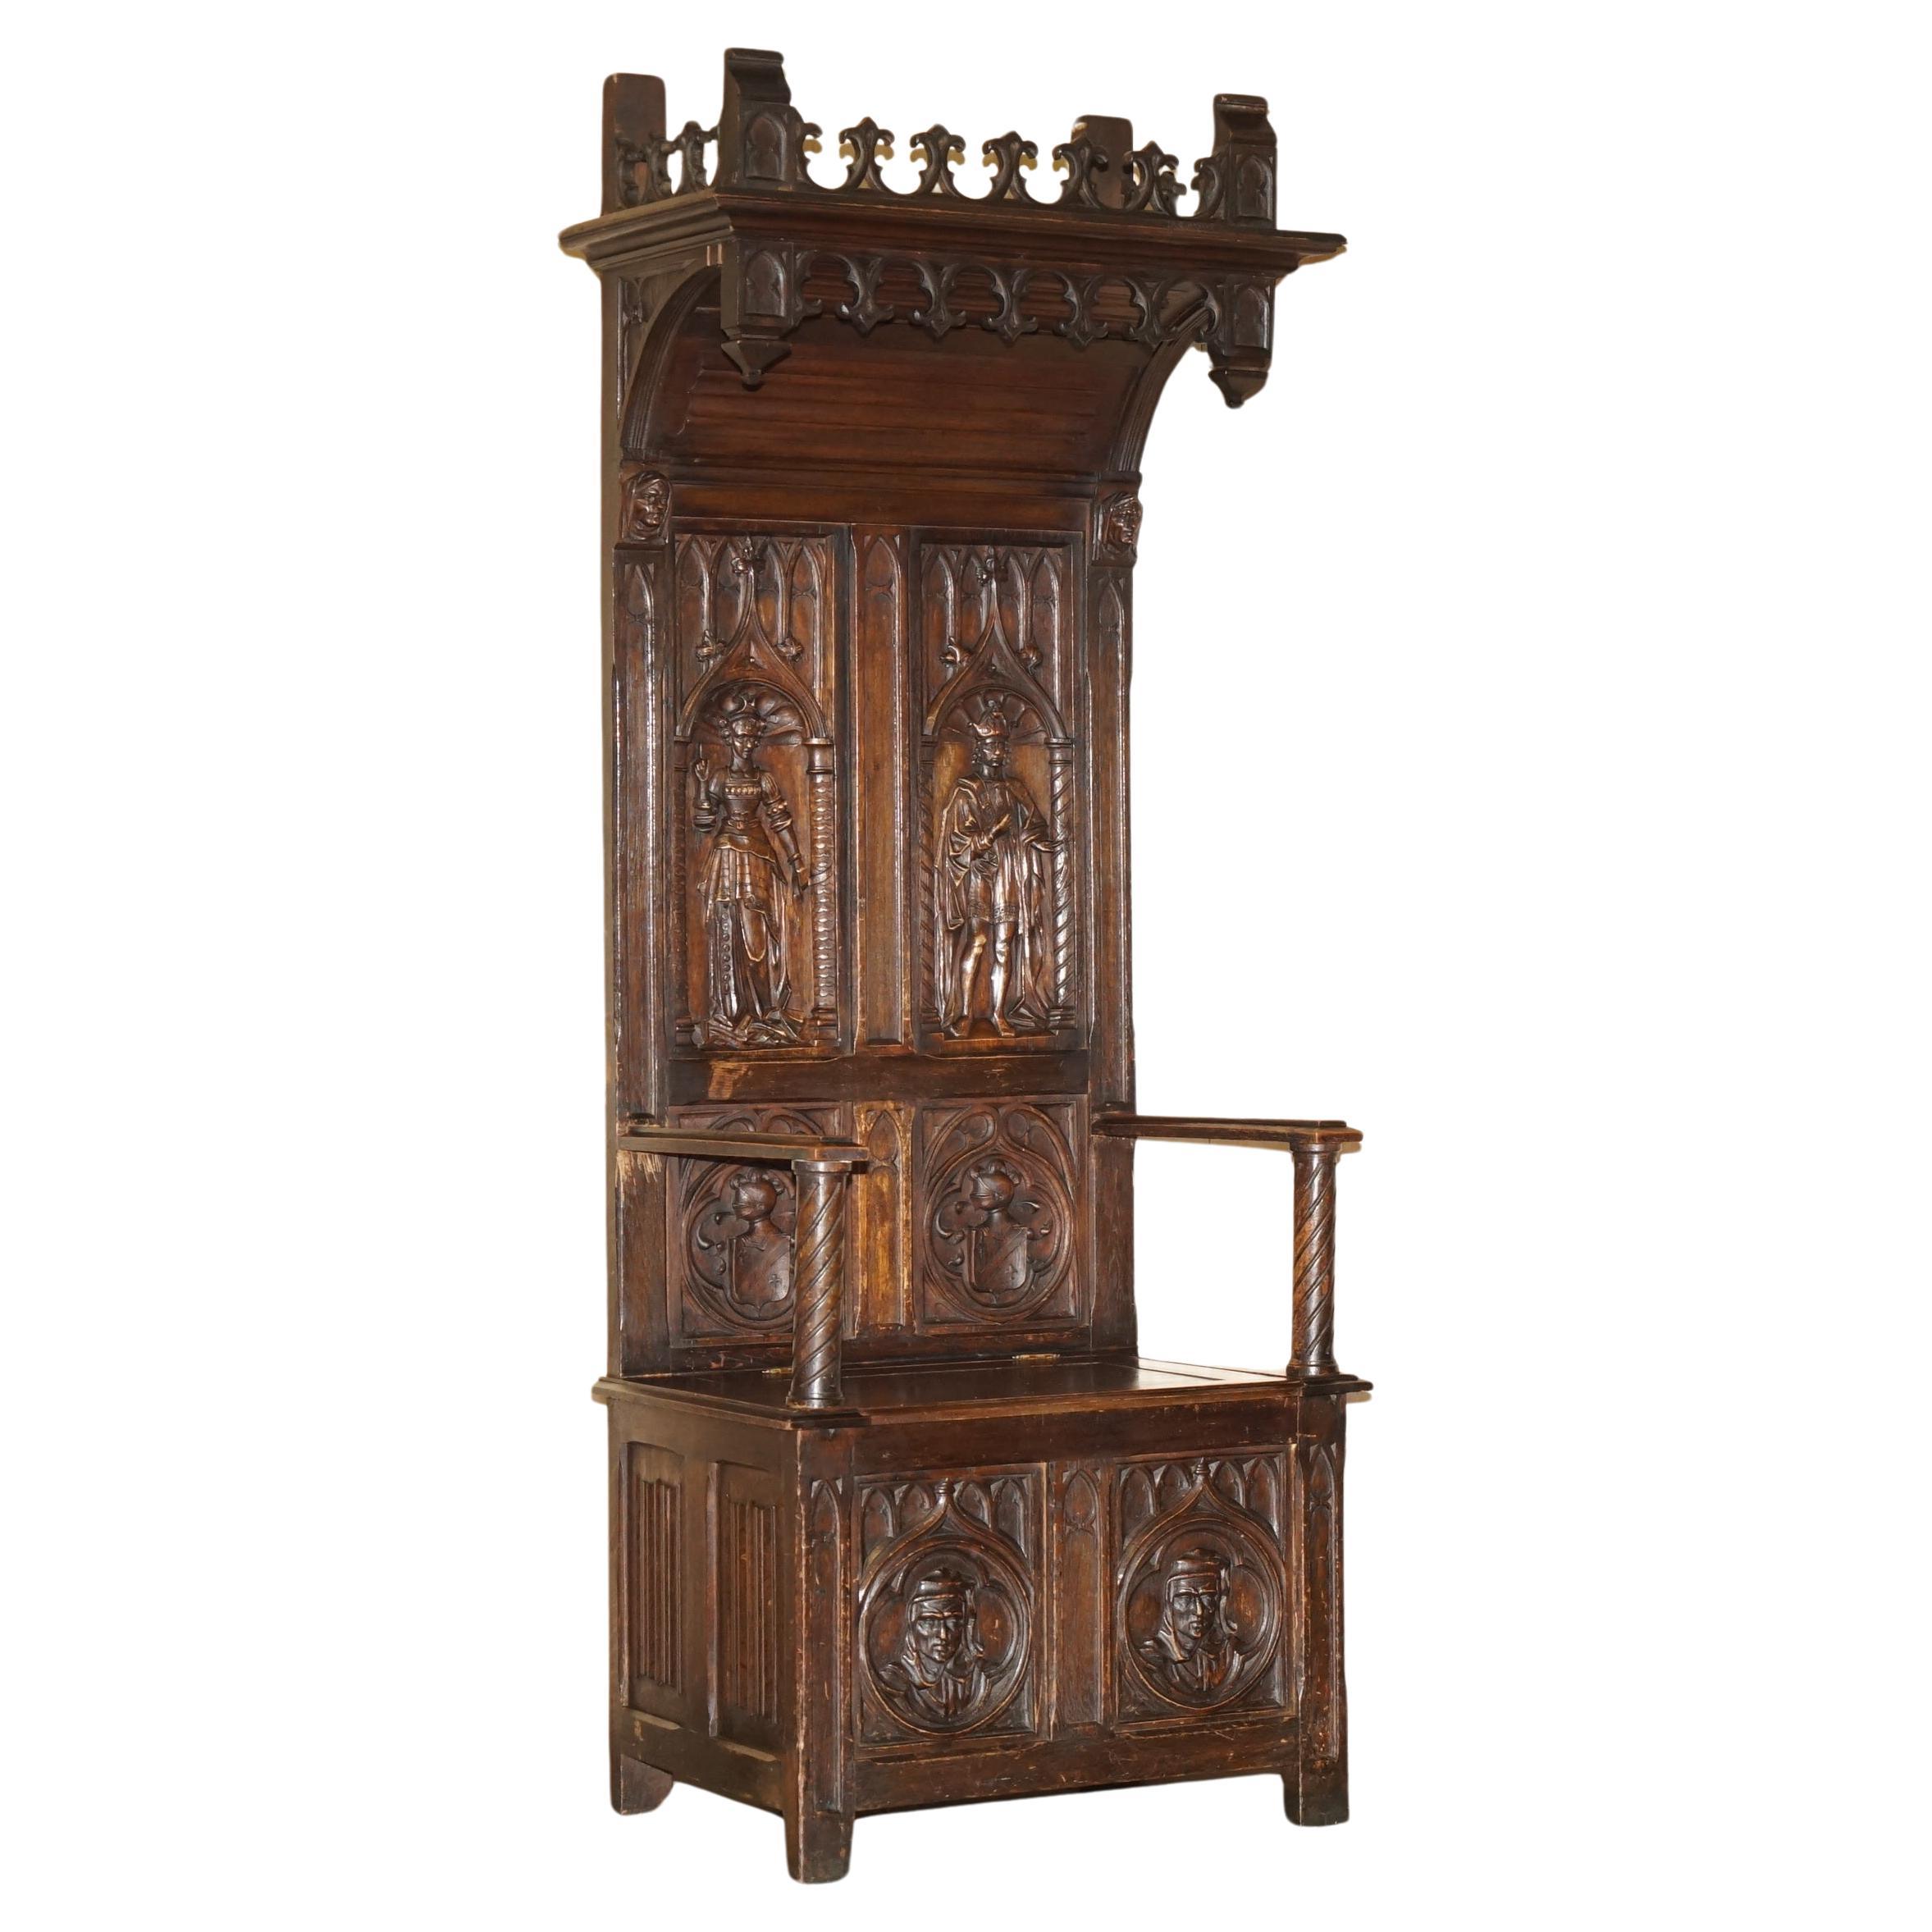 FINE ANTIQUE CiRCA 1860 JACOBEAN GOTHIC REVIVAL HAND CARVED PORTERS HALL CHAIR im Angebot